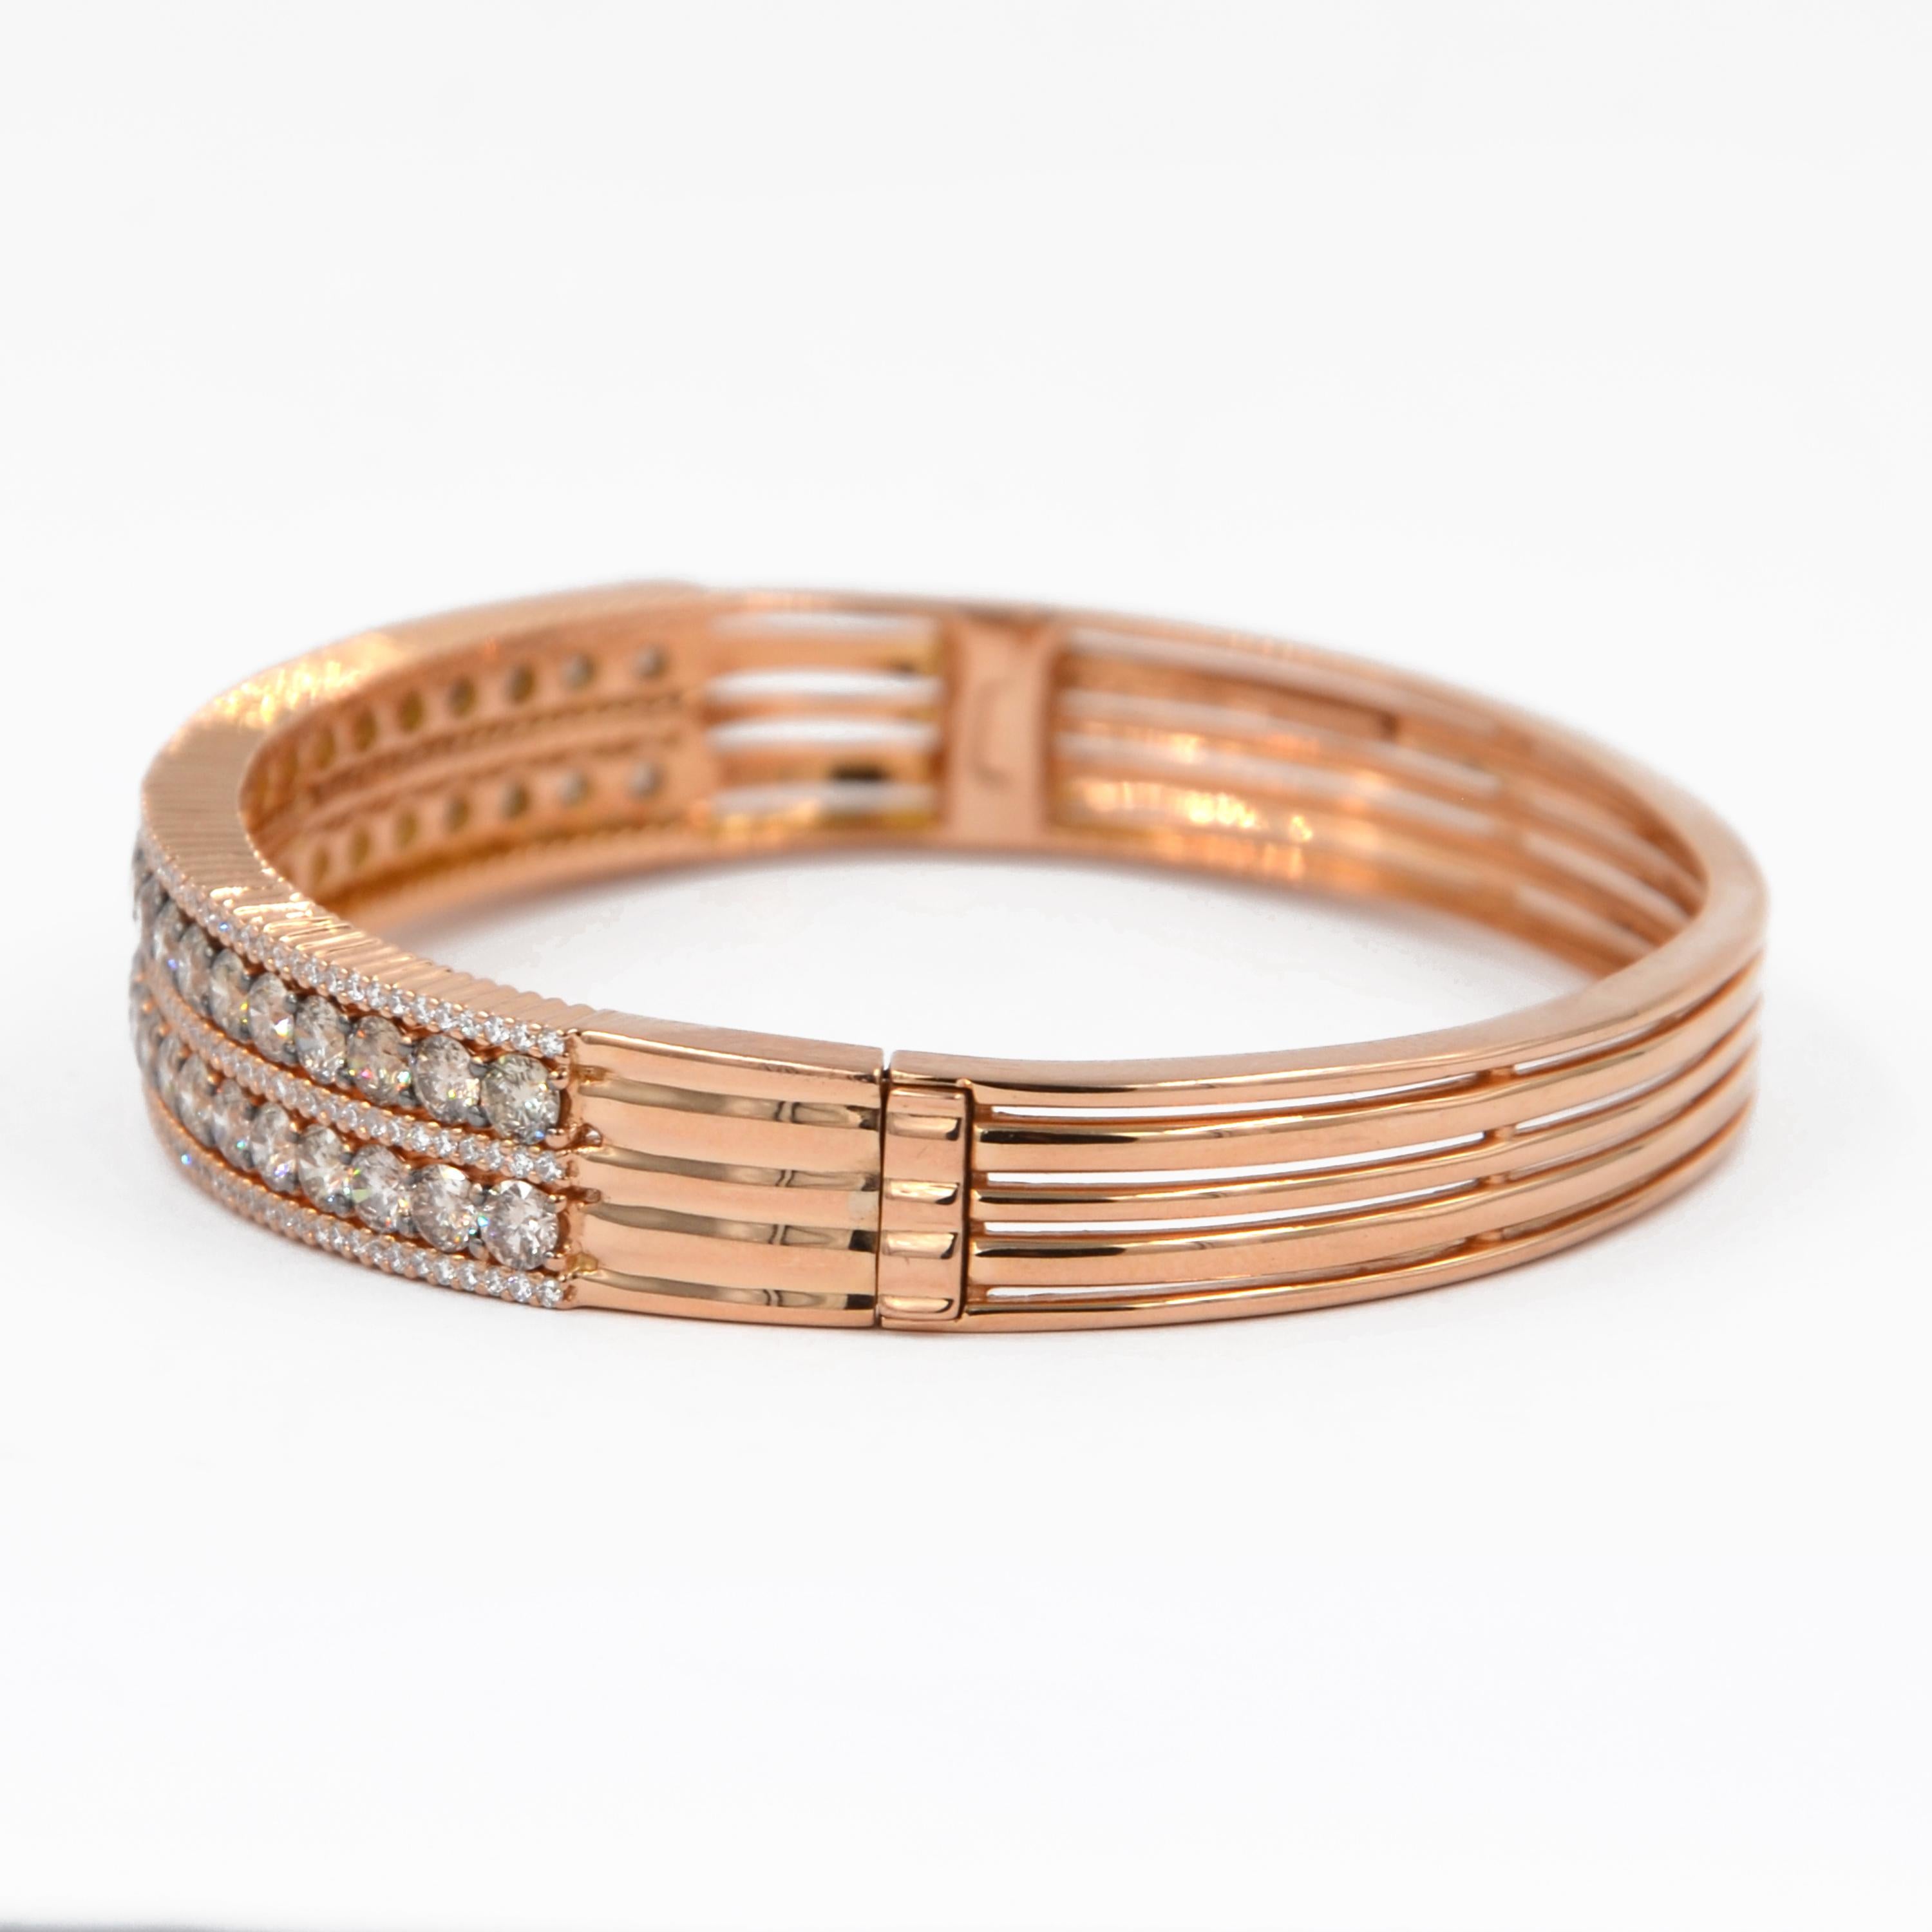 18KT Rose Gold Brown and White Diamonds GARAVELLI BRACELET 
Oval shape diameters mm 63X50 with clasp . 
GOLD  gr: 39.30
BROWN DIAMONDS ct : 5.65
WHITE DIAMONDS ct 1.30